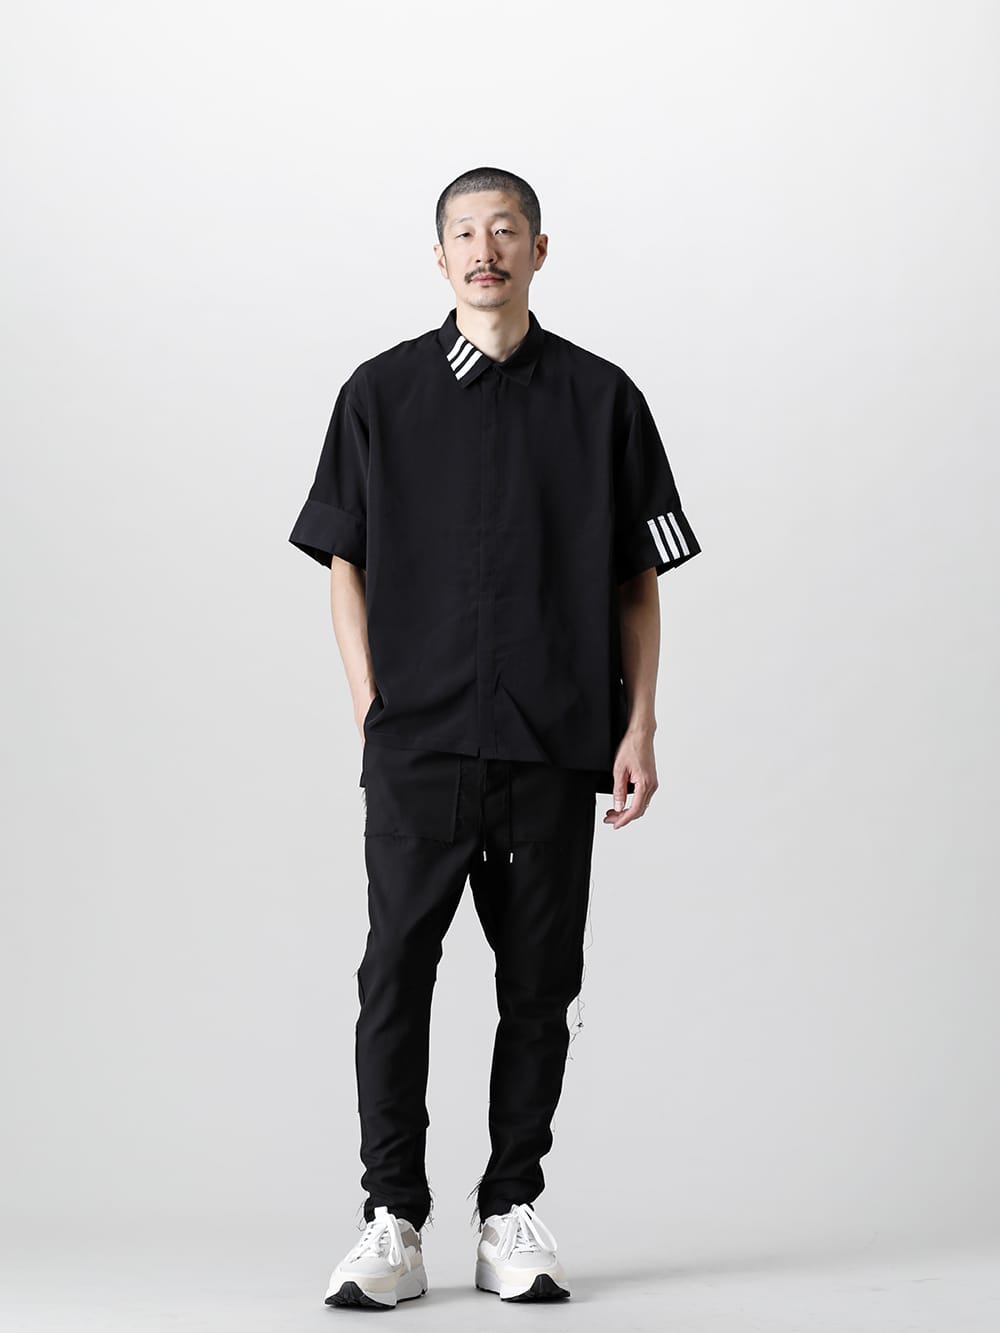 The 2nd collection from Y-3 2022 Spring/Summer collection has